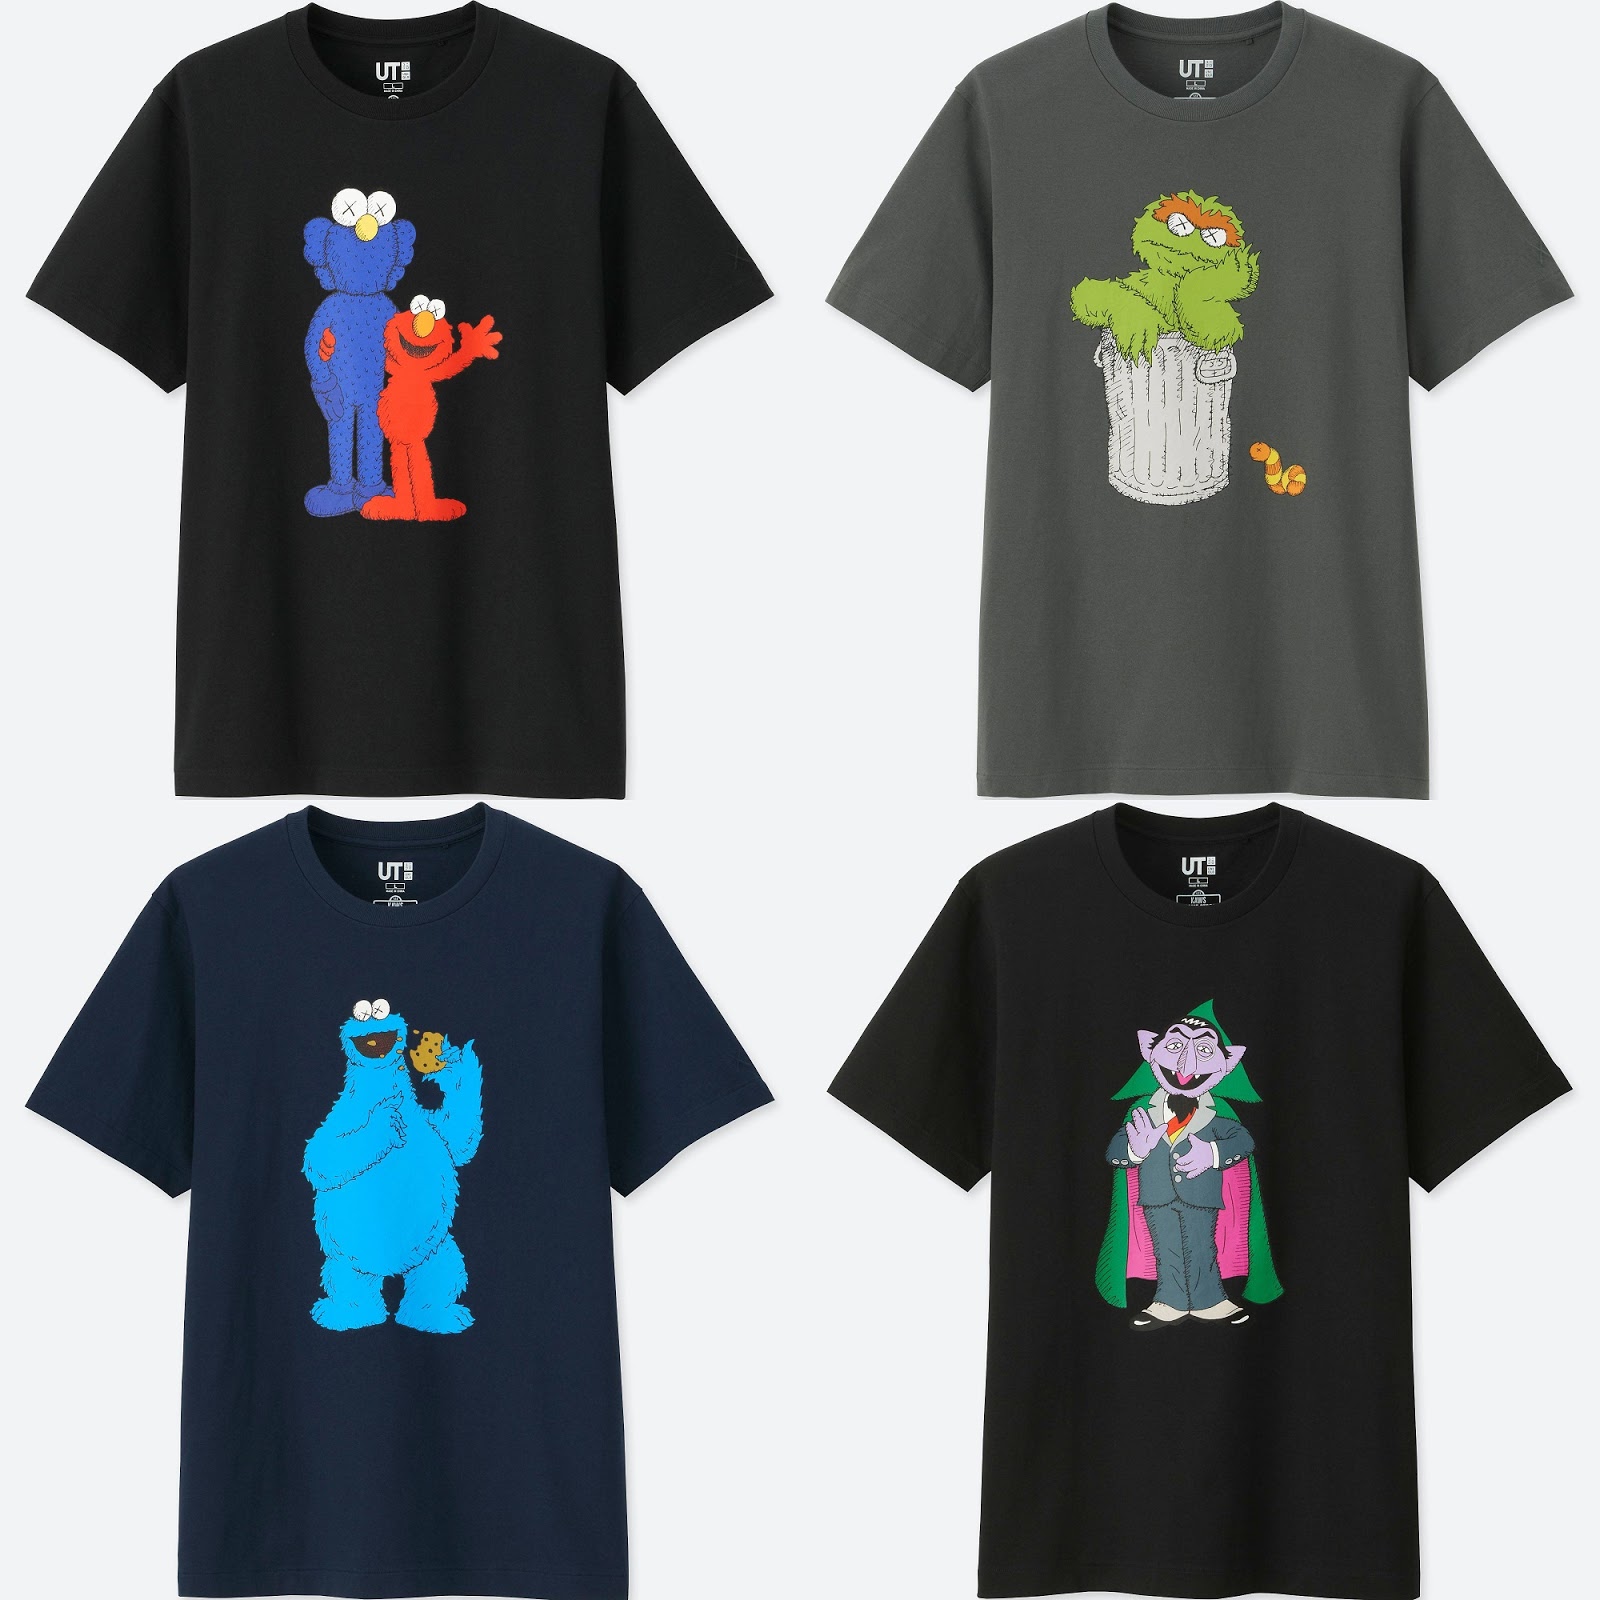 The Blot Says: KAWS x Sesame Street T-Shirt Collection by Uniqlo